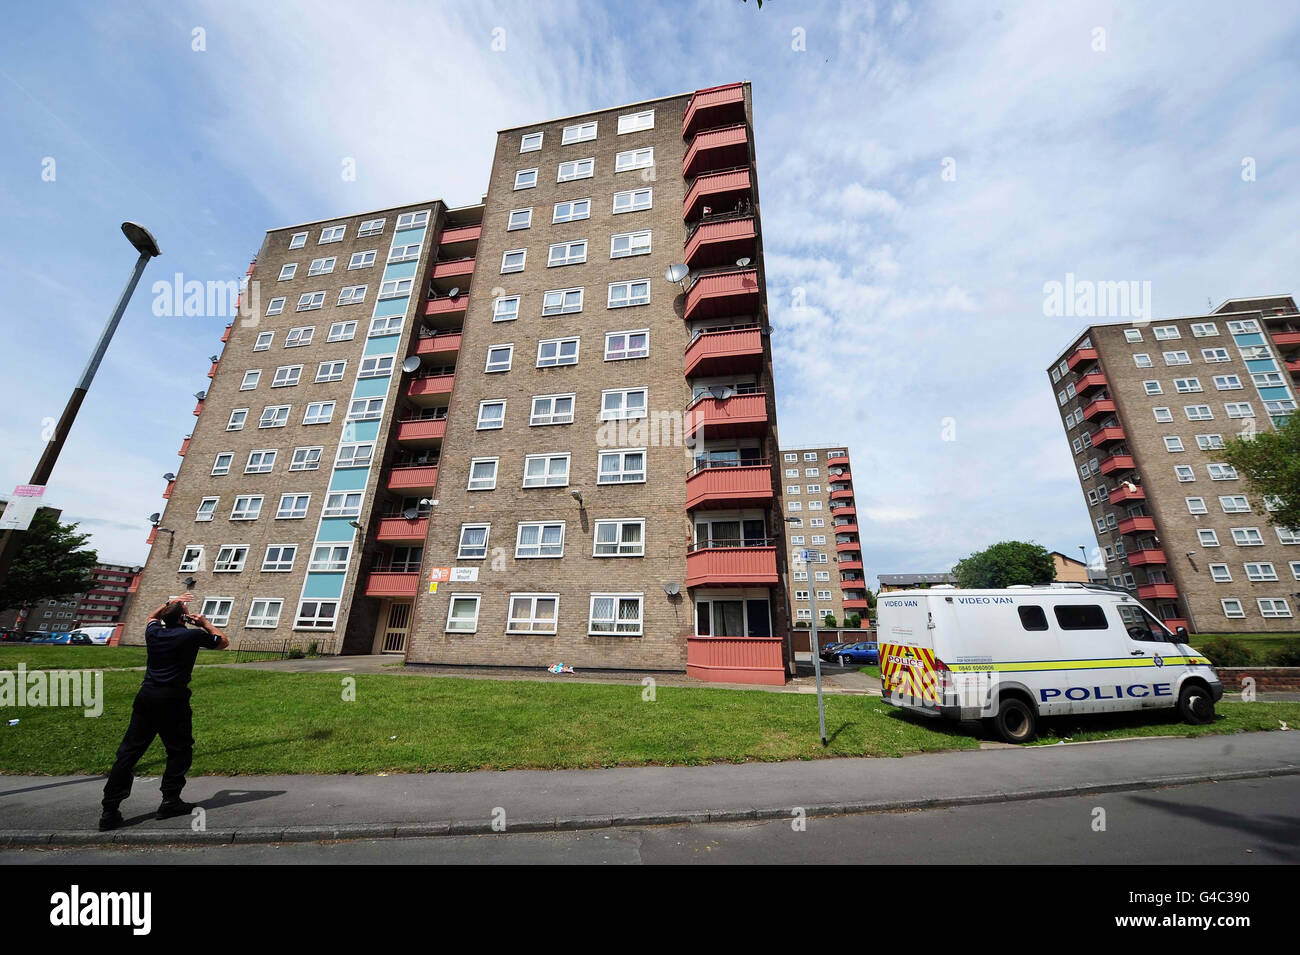 Boy falls to his death in Leeds. A general view of Lindsey Mount flats in Leeds, where a 6-year-old boy fell to his death yesterday. Stock Photo